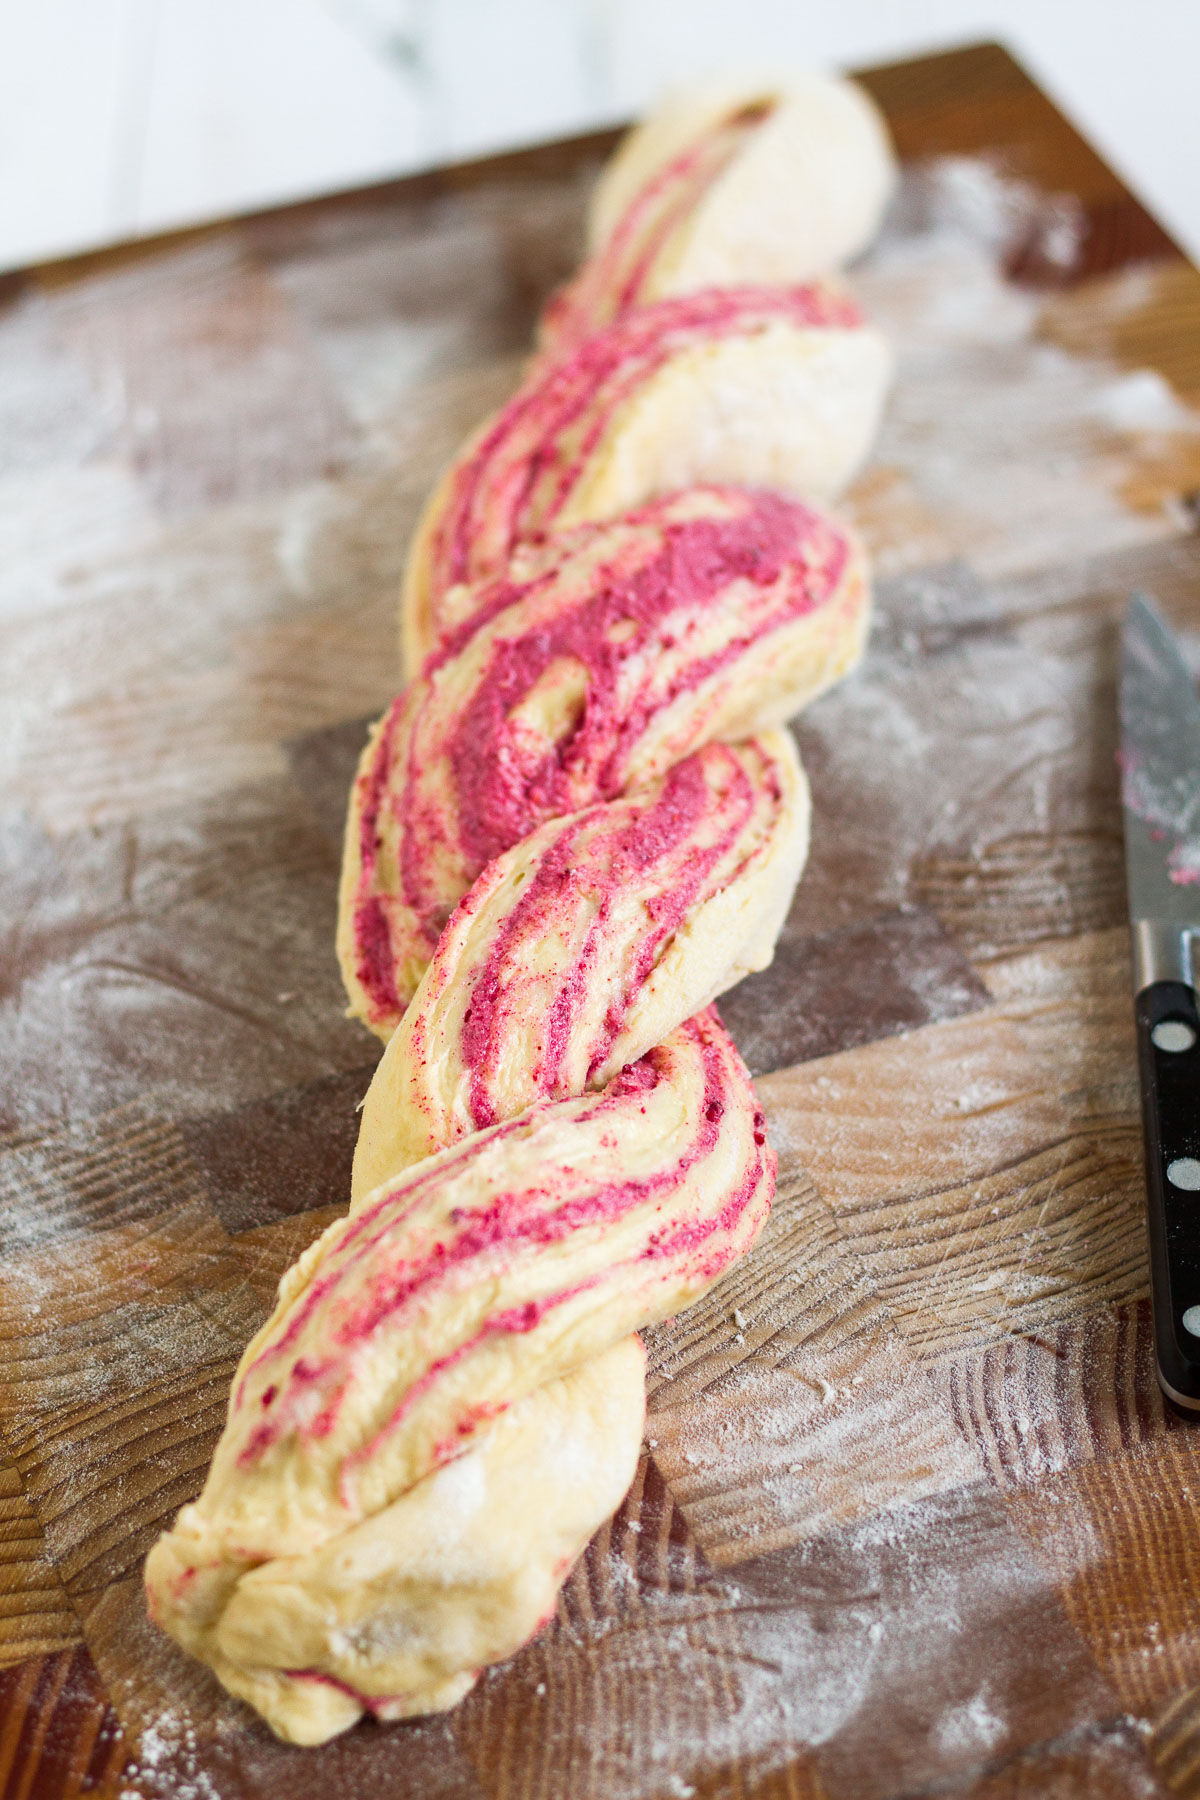 A classic brioche dough with raspberry swirled throughout, topped with a sticky sugar syrup and crushed, freeze-dried raspberries